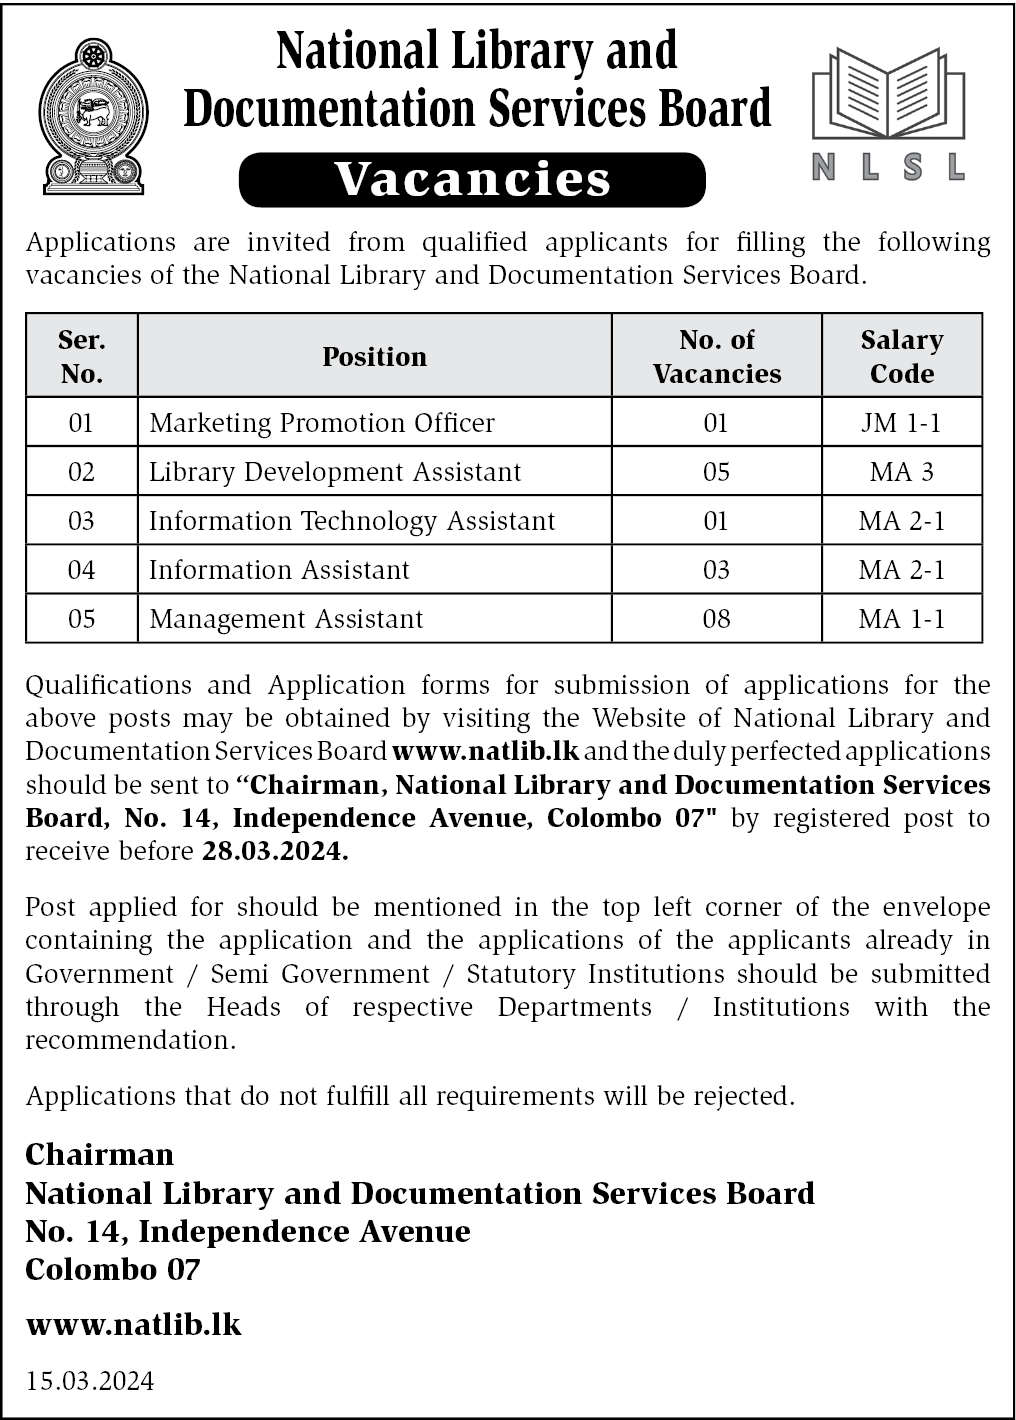 National Library & Documentation Services Board Job Vacancies - 2024 (March)